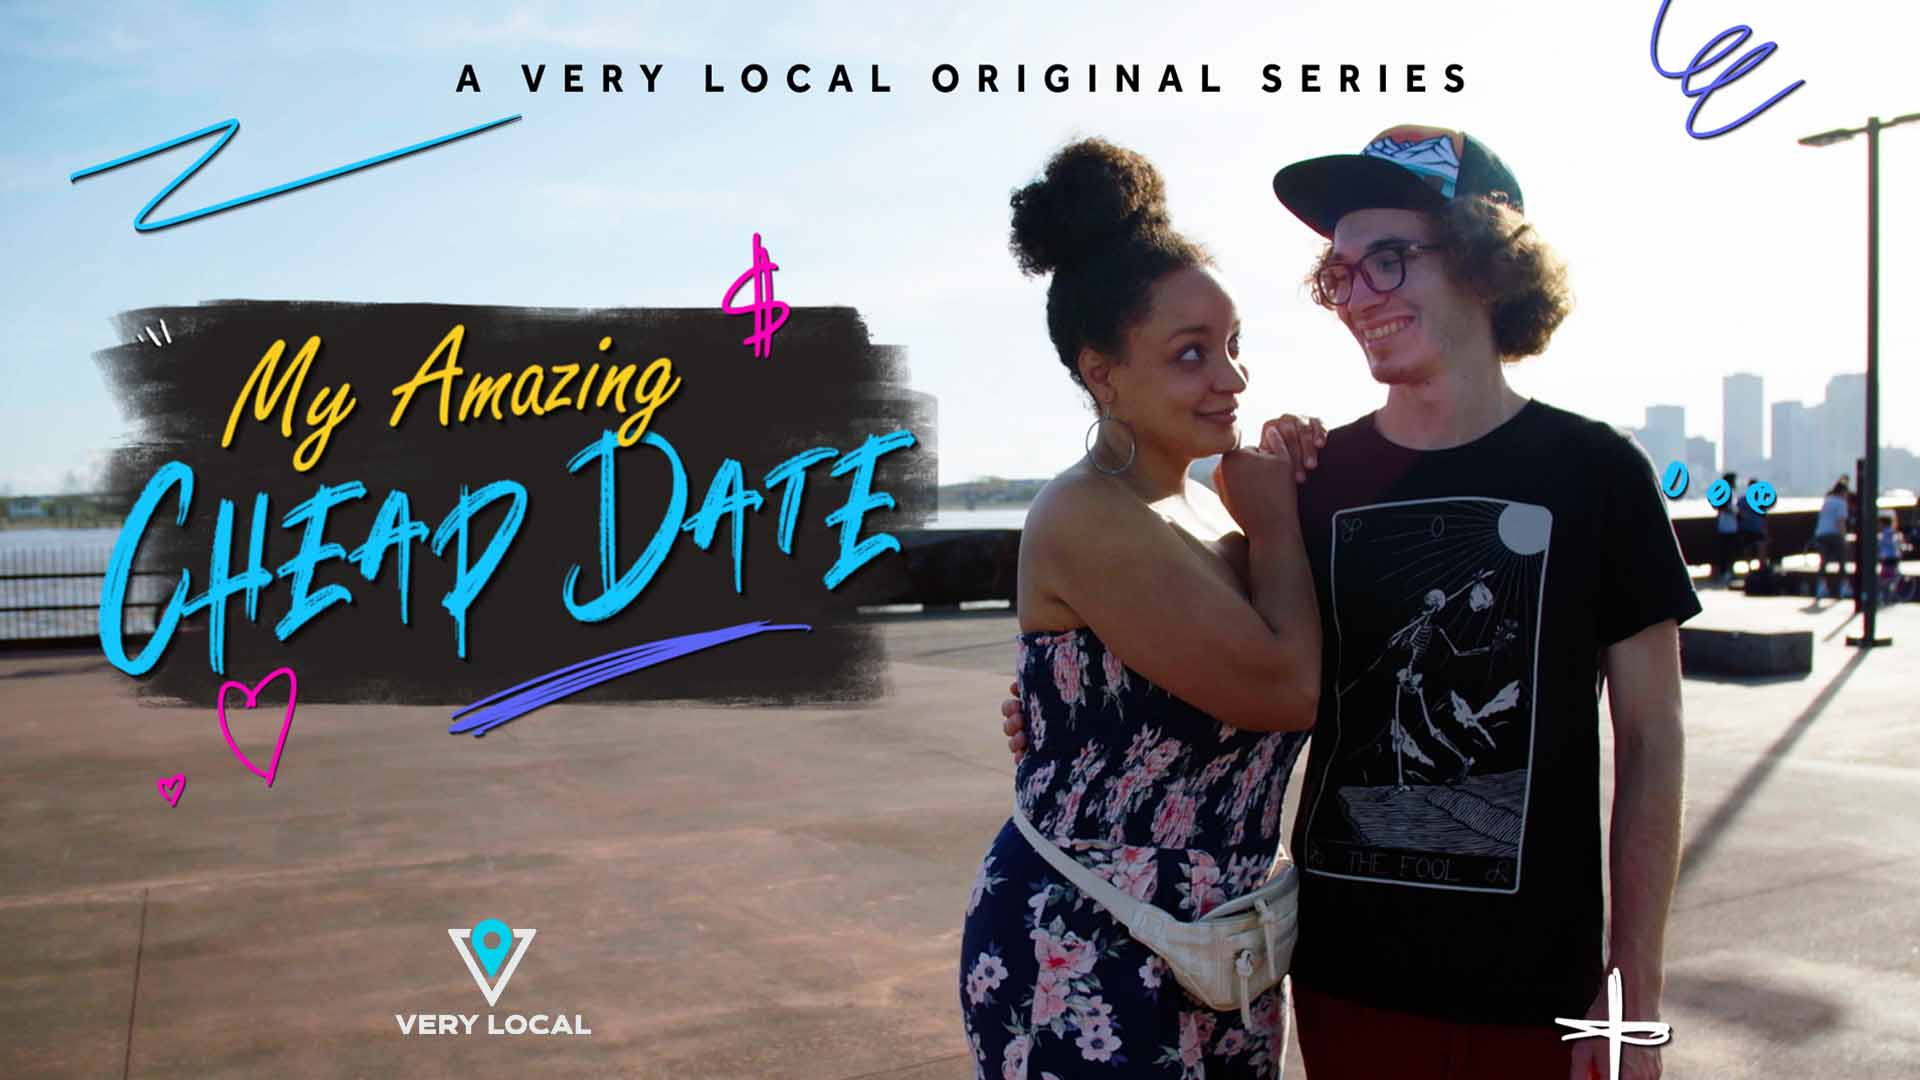 Watch My Amazing Cheap Date New Orleans on the Very Local app